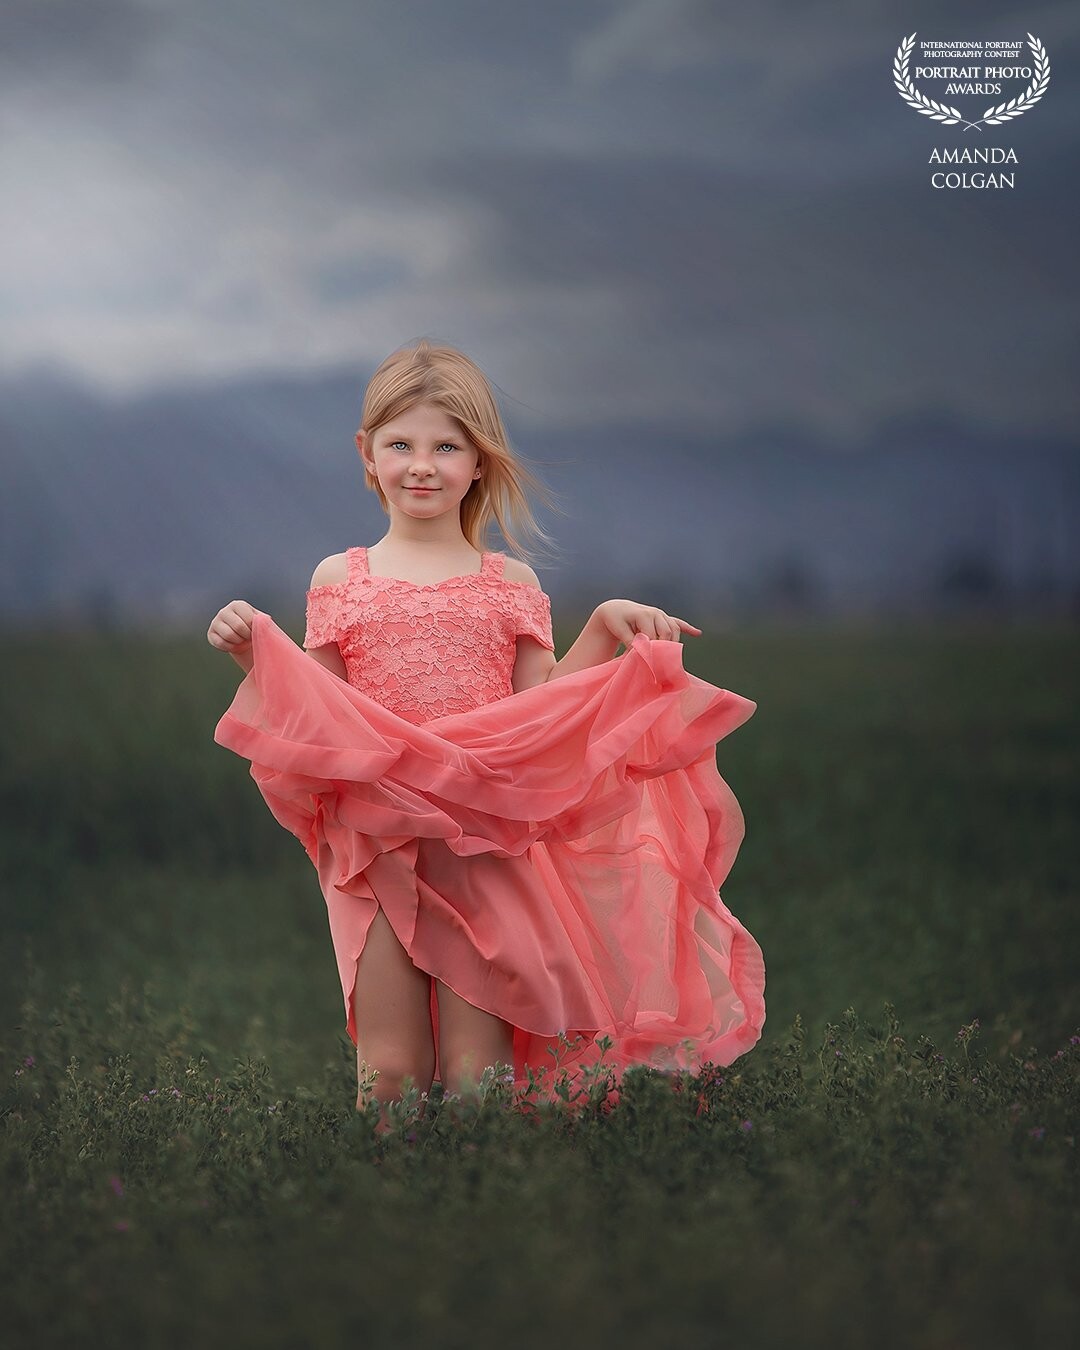 Dainty-ish. Emmy, 6, USA. When the picture and the title say it all, there isn't much to caption. When all that is tomboy meets dress and the outcome is caught on camera.